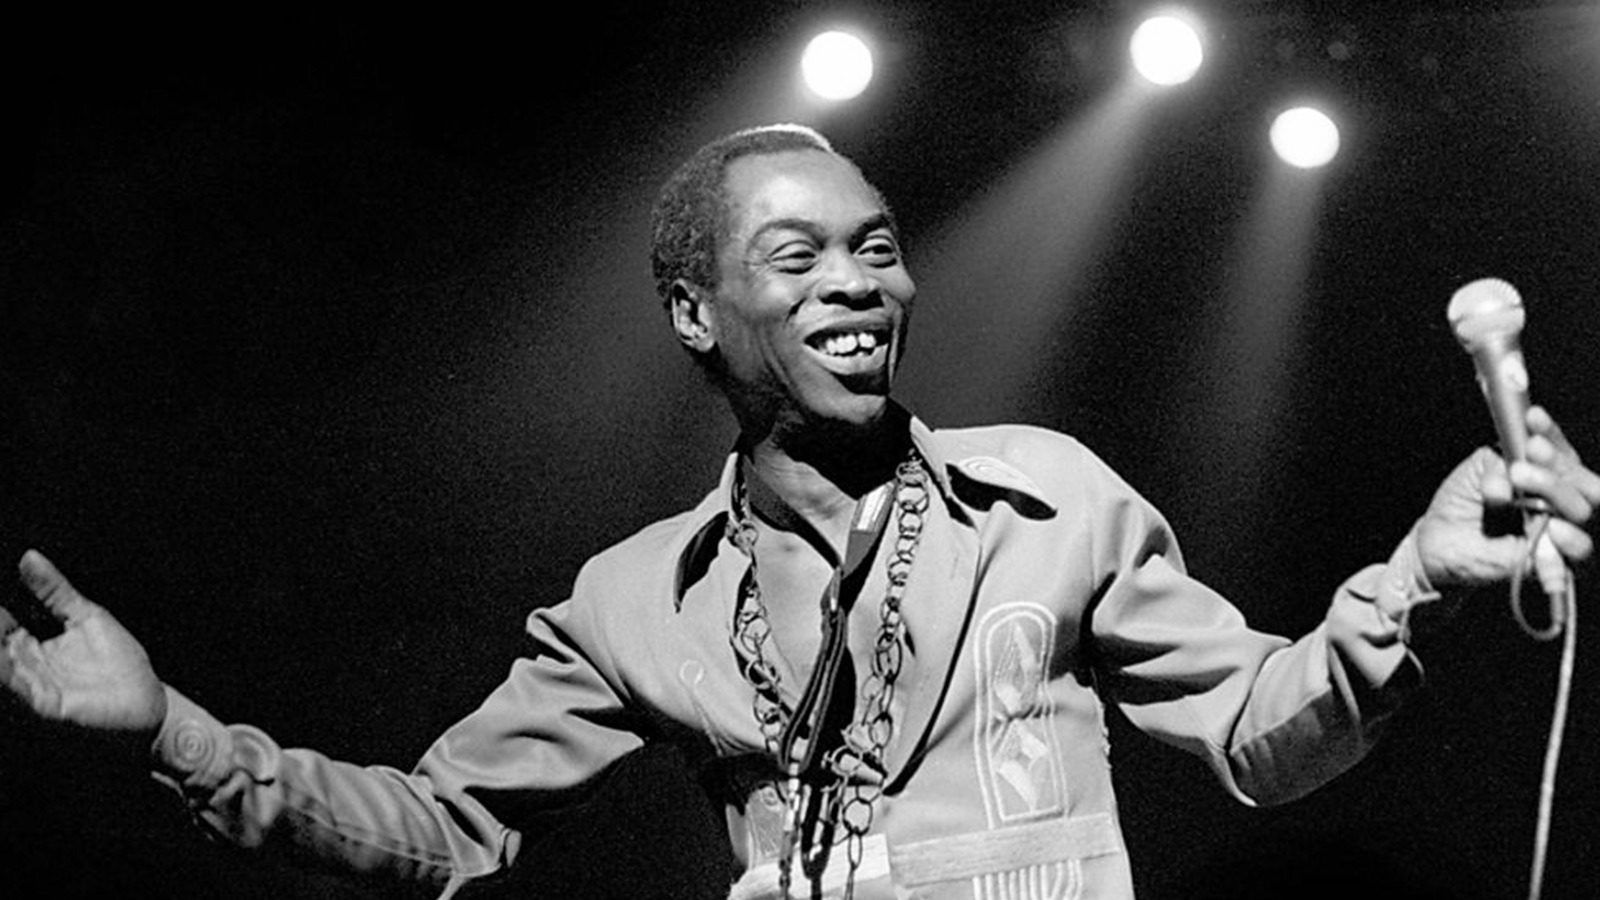 Nigerian icon Fela is long overdue for the Rock & Roll Hall of Fame